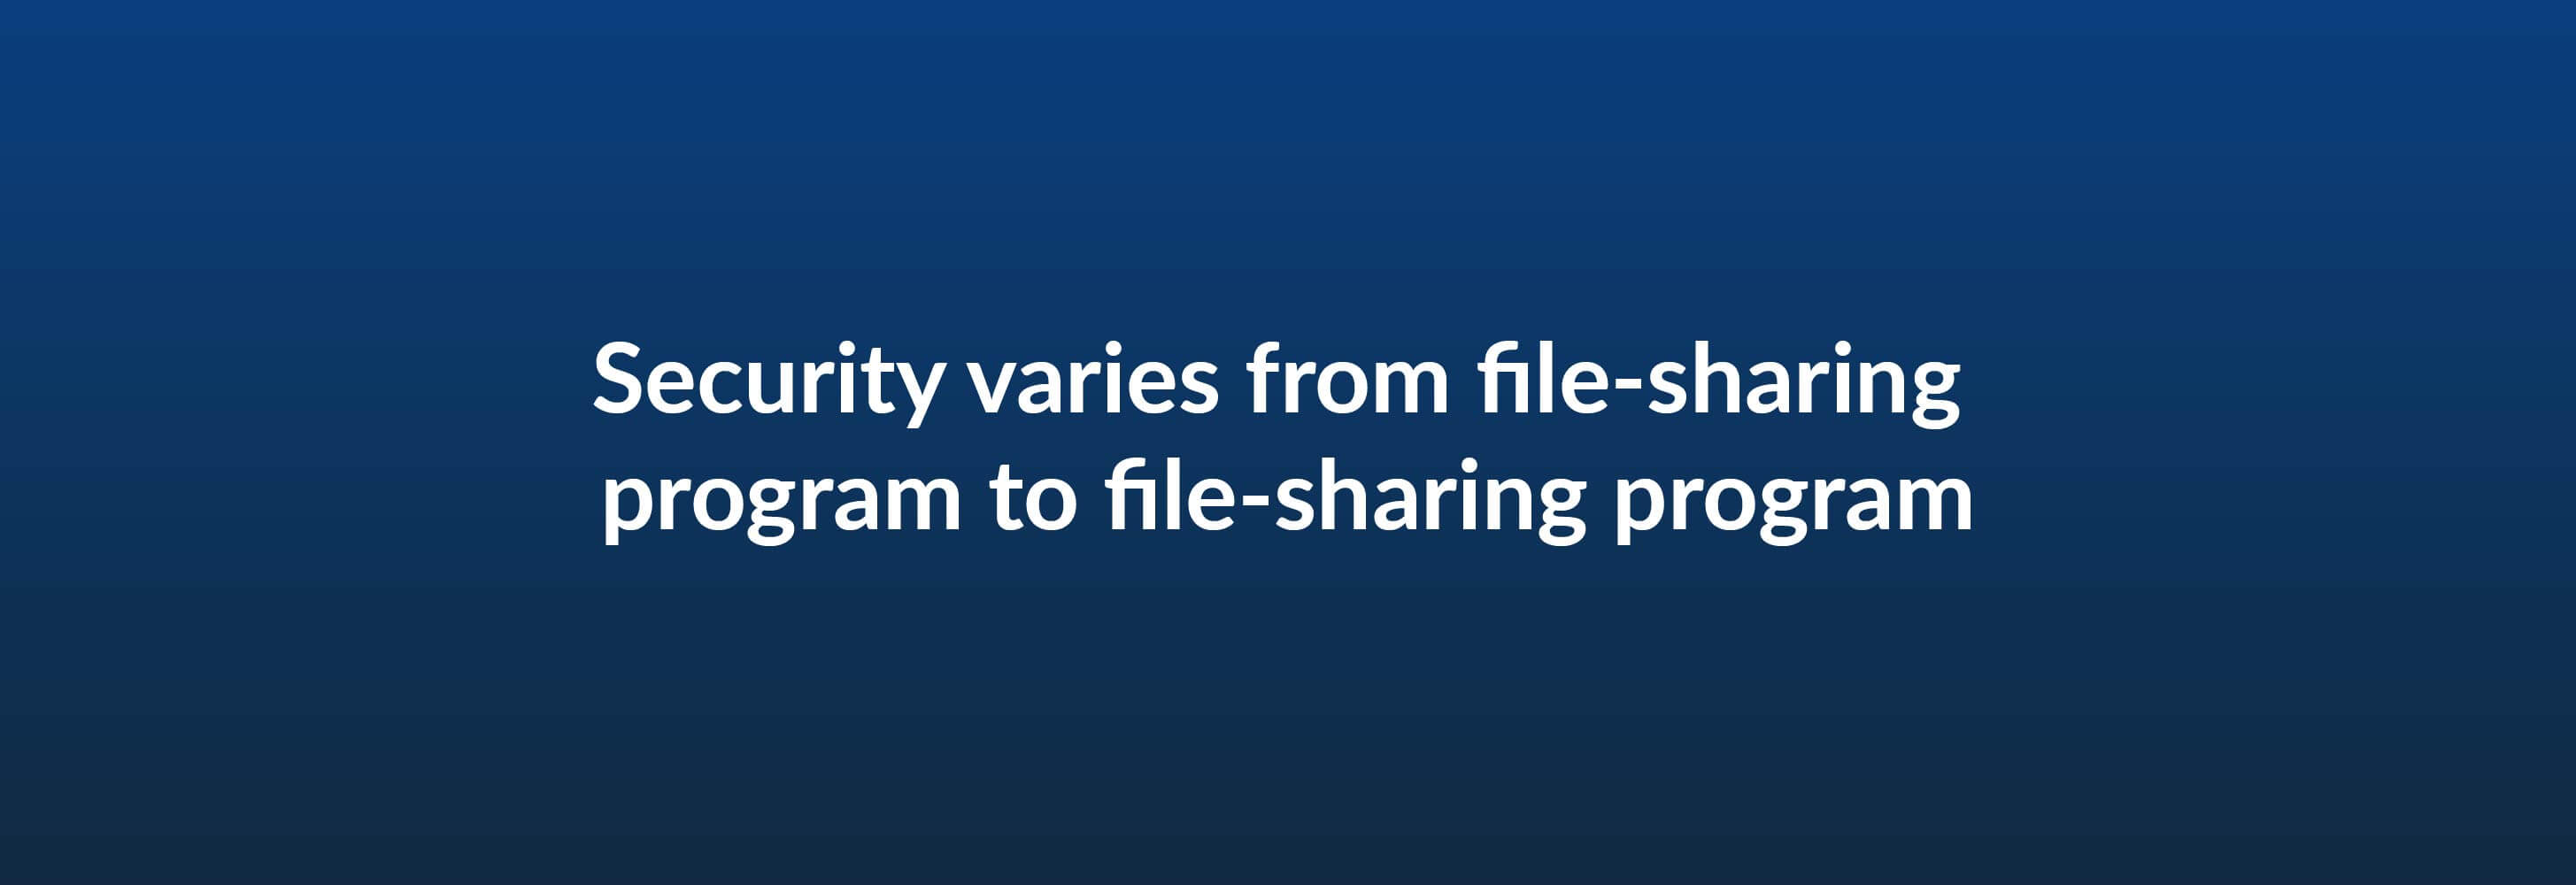 Security varies from file-sharing program to file-sharing program